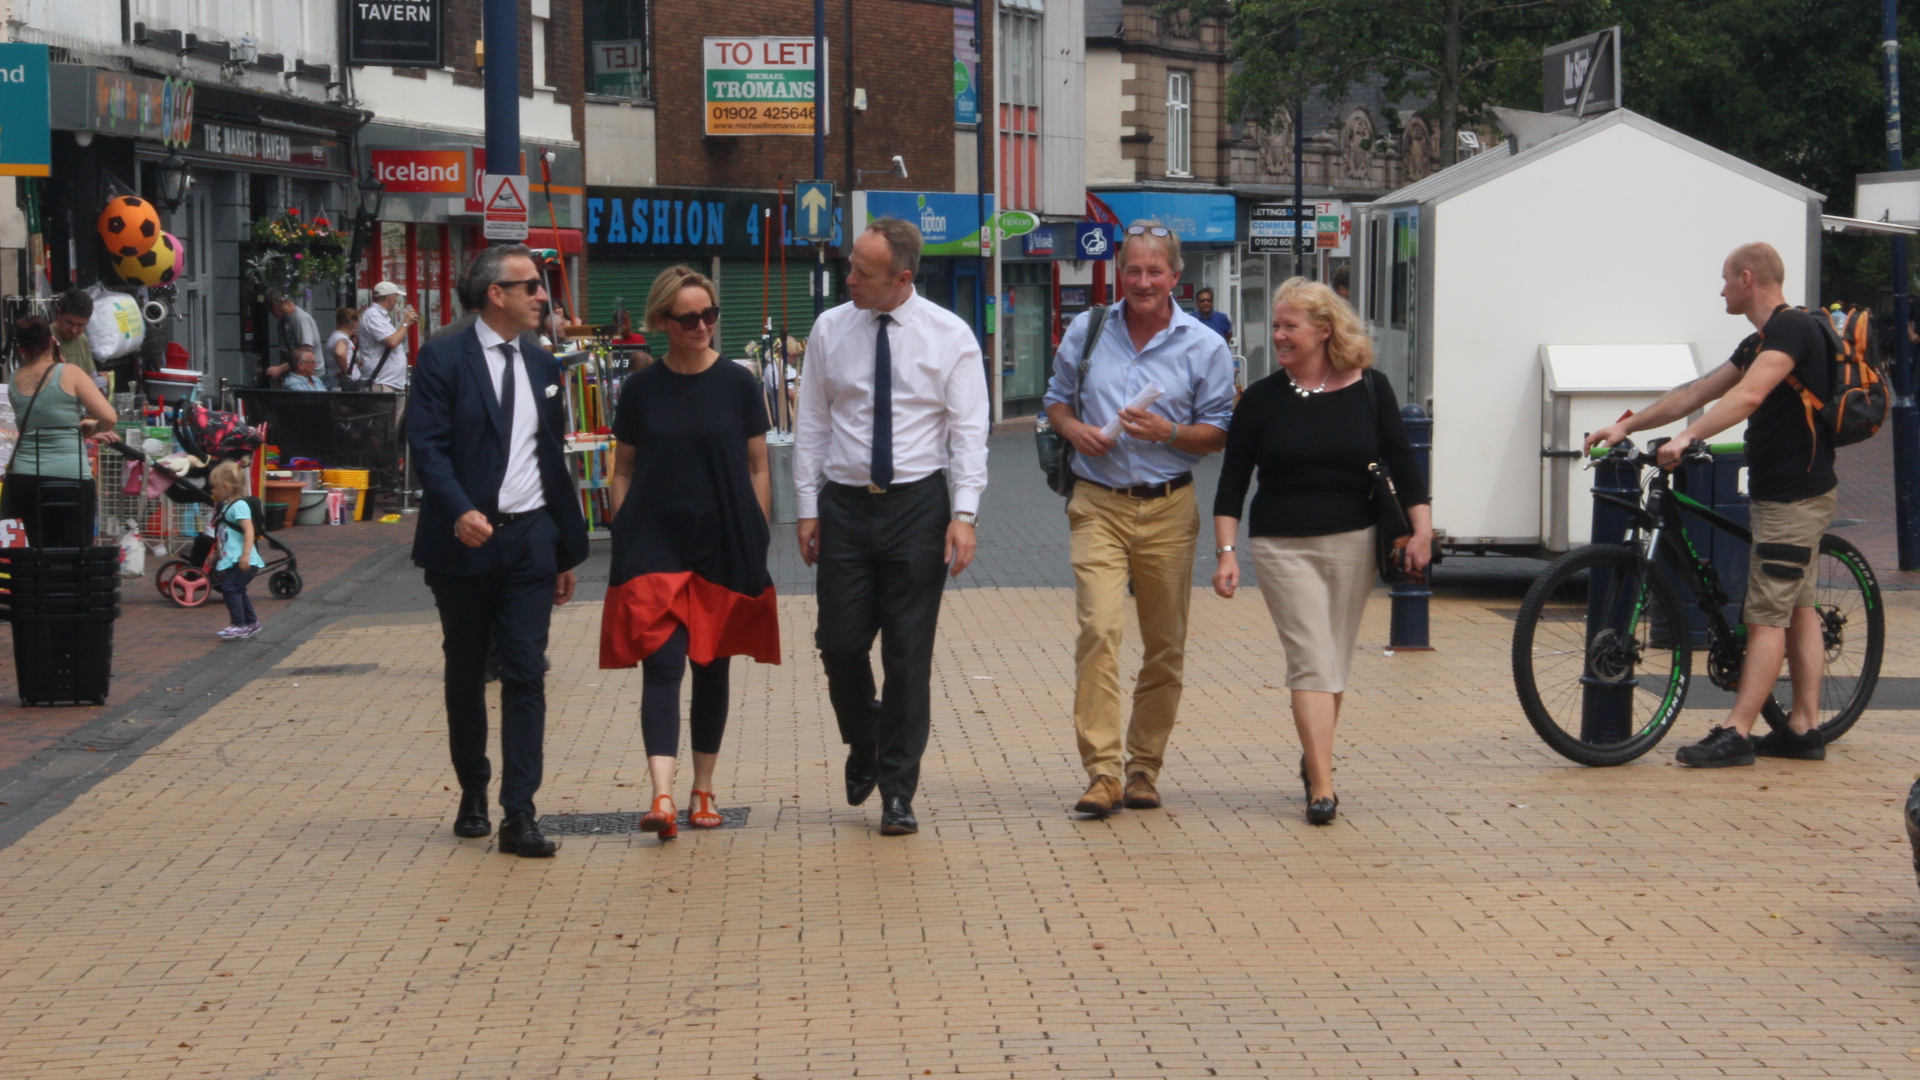 L-R Ed Watson from Arup, WMCA design lead Louise Wyman, taskforce chair Jon Bramwell, director of urban planning at the University of Birmingham Austin Barber, and WMCA head of policy for housing and regeneration Patricia Willoughby